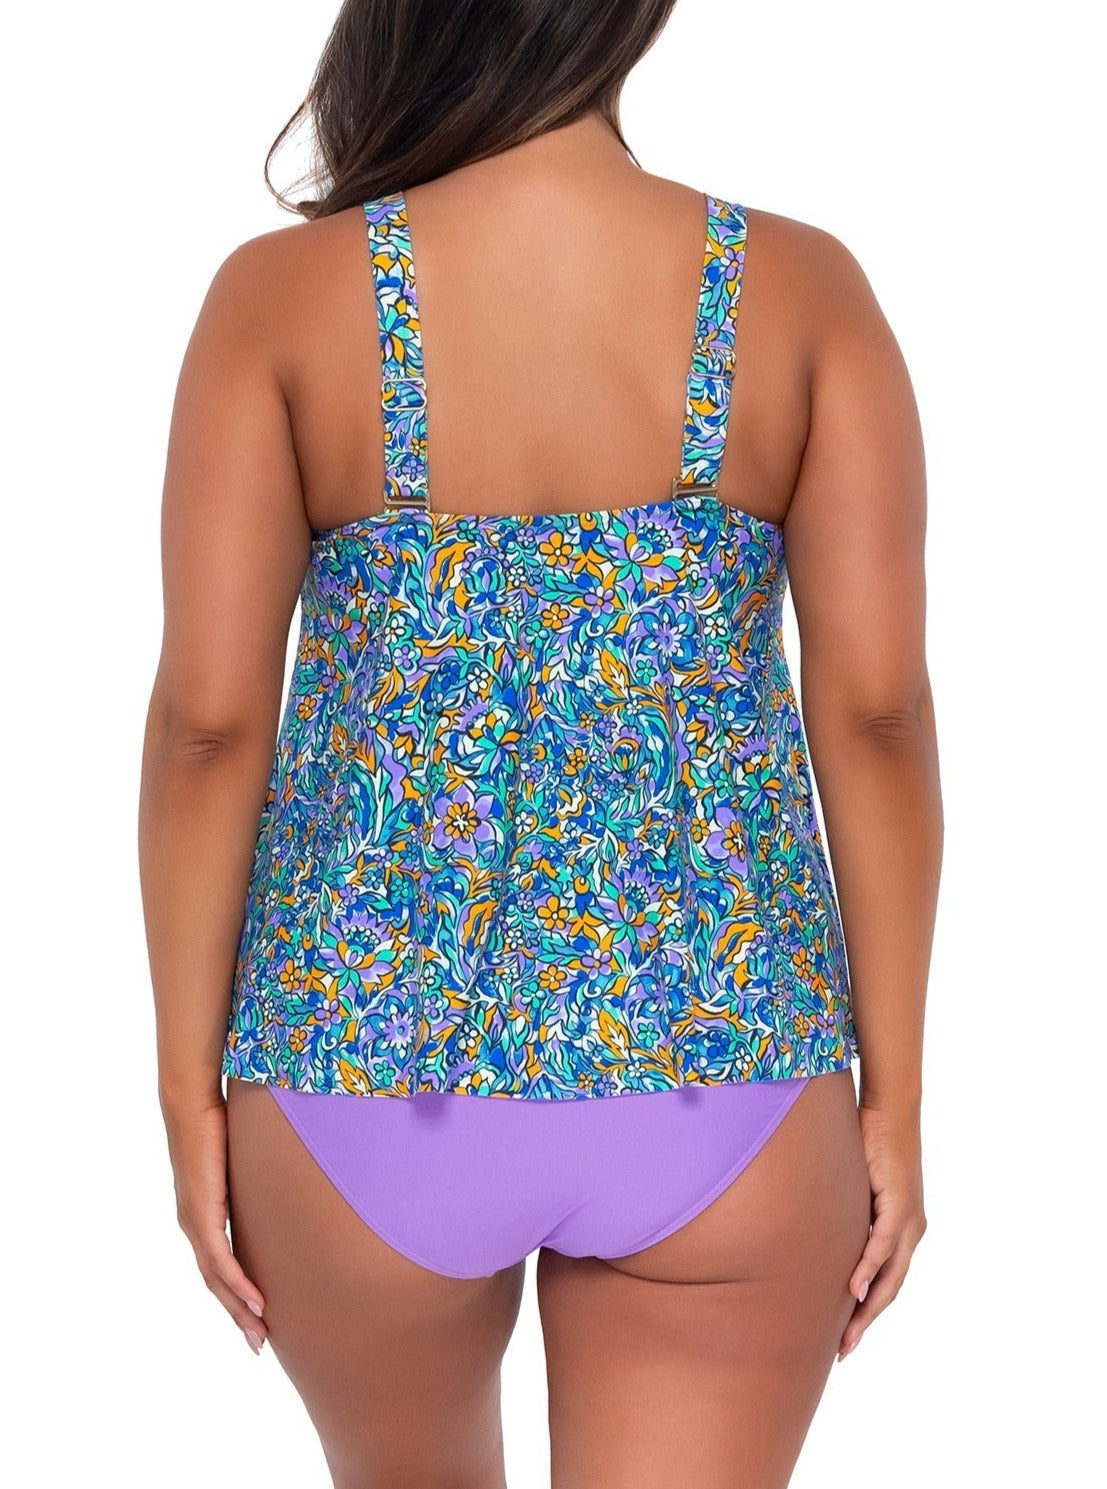 Sunsets Escape "Brands,Swimwear" 6 / PANSY / 964T Sunsets Escape Pansy Fields Sadie Tankini Top